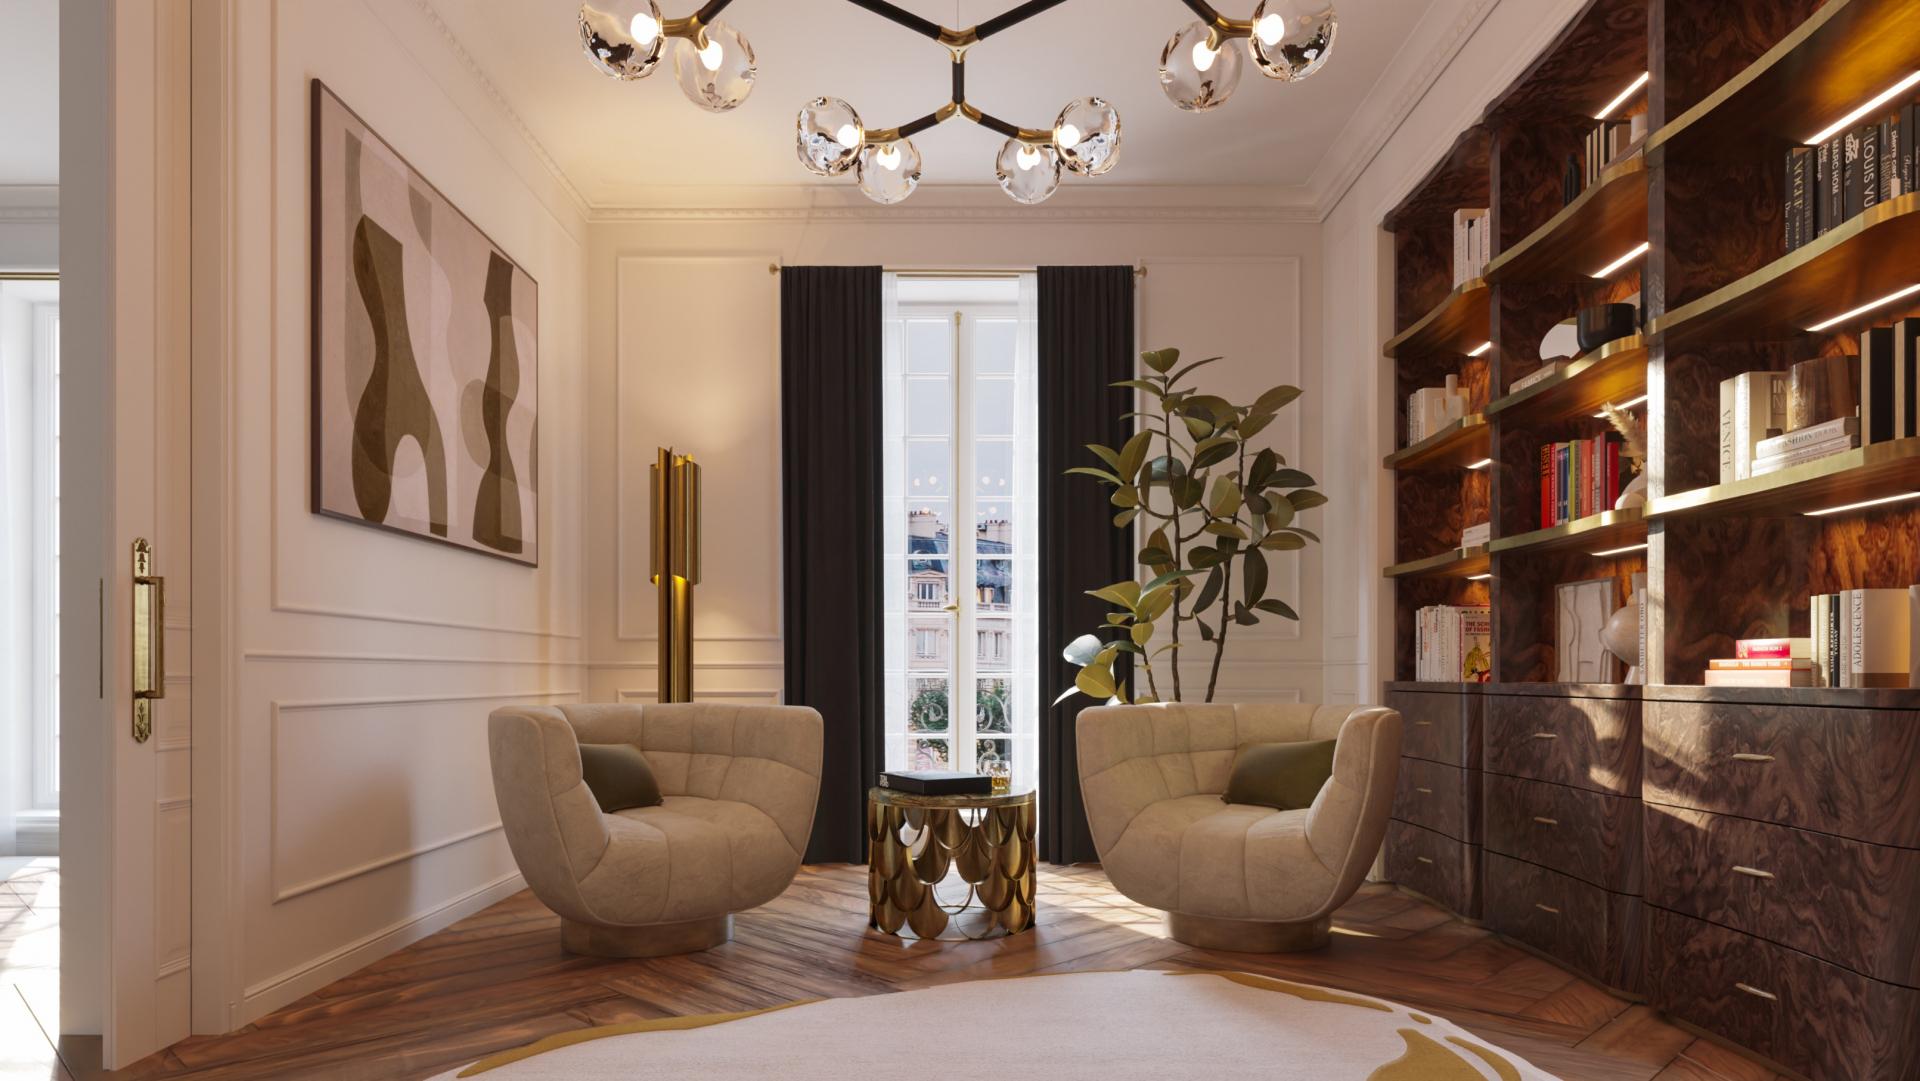 Step inside a 6,000 sq. ft. Parisian apartment that’s as chic as the city itself